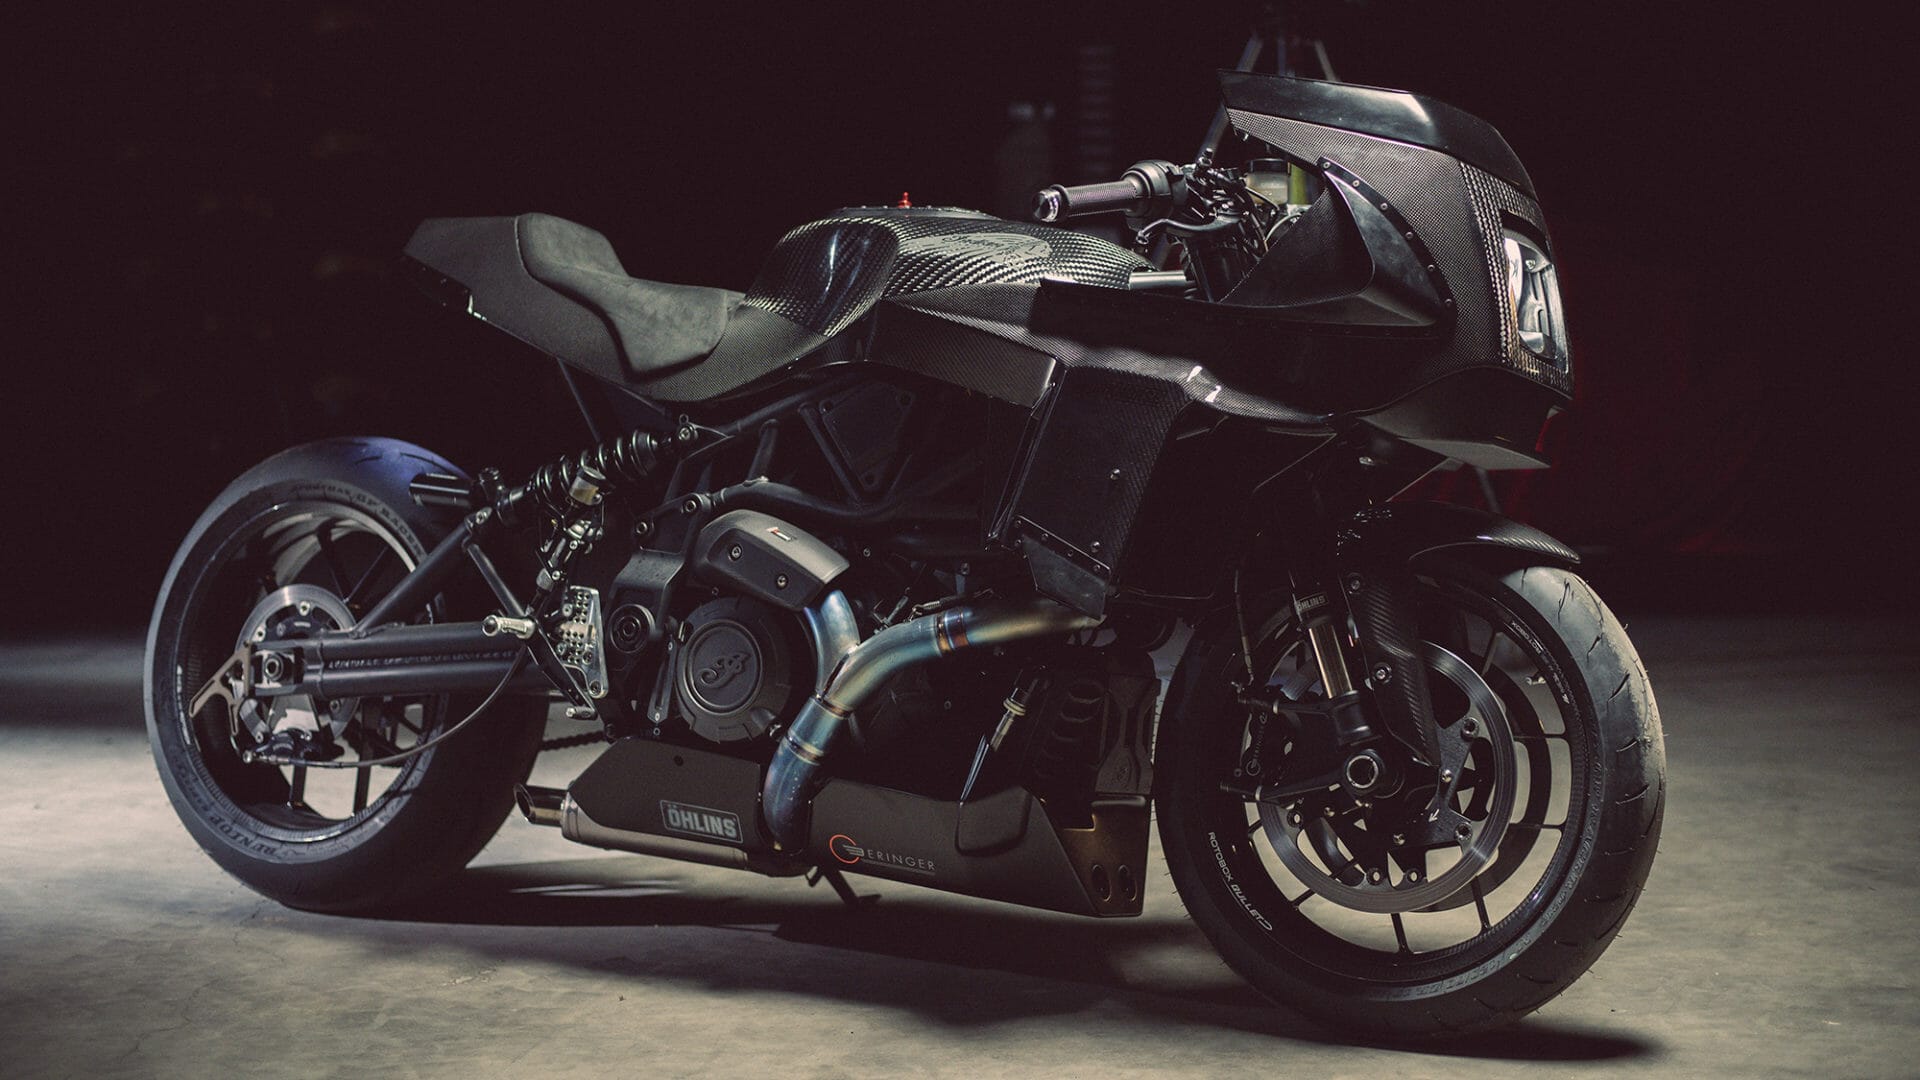 Indian FTR Black Swan by Workhorse Speed Shop
- also in the MOTORCYCLES.NEWS APP